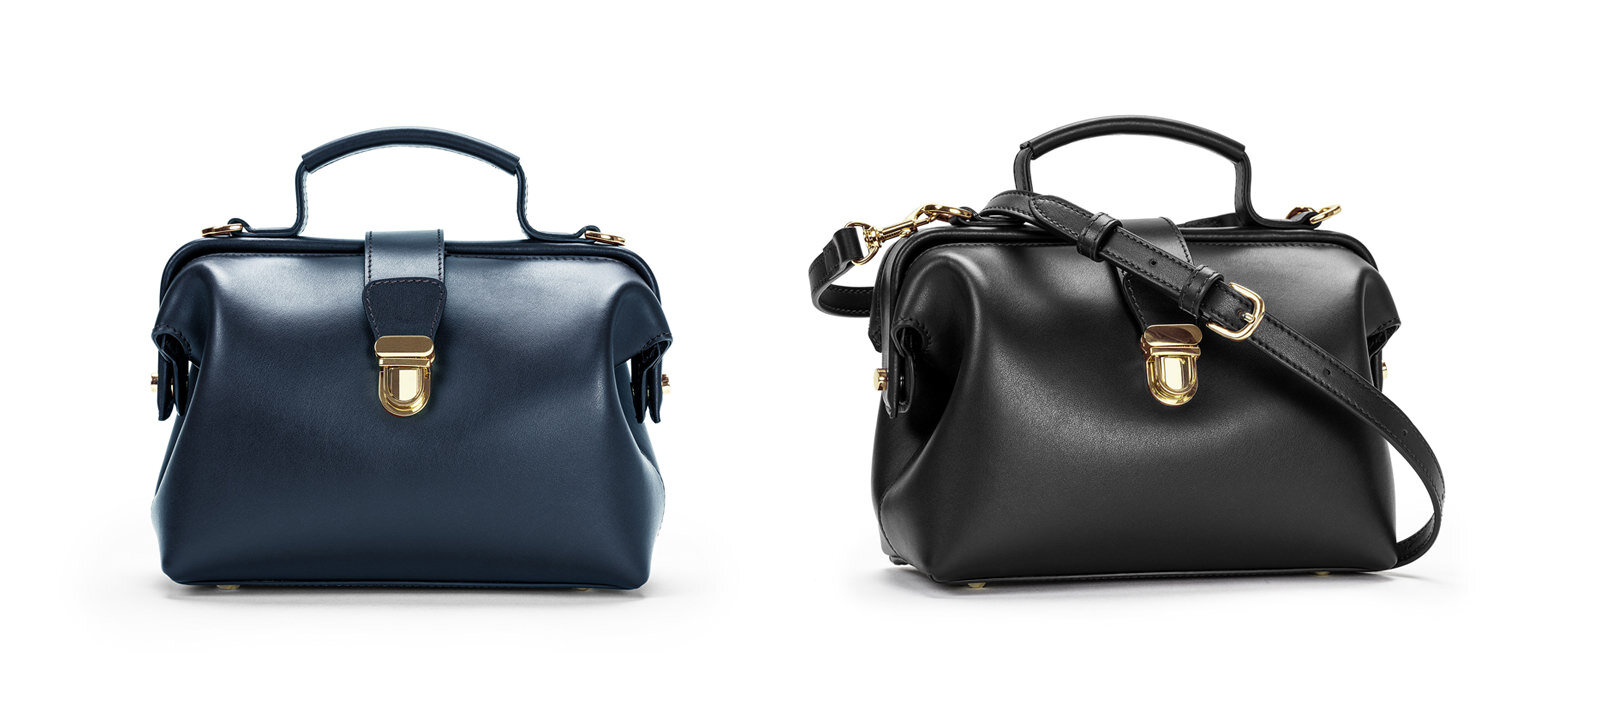 MINI BAG, BIG BANG// THE DOCTOR'S BAG FROM LINJER — Go French Yourself